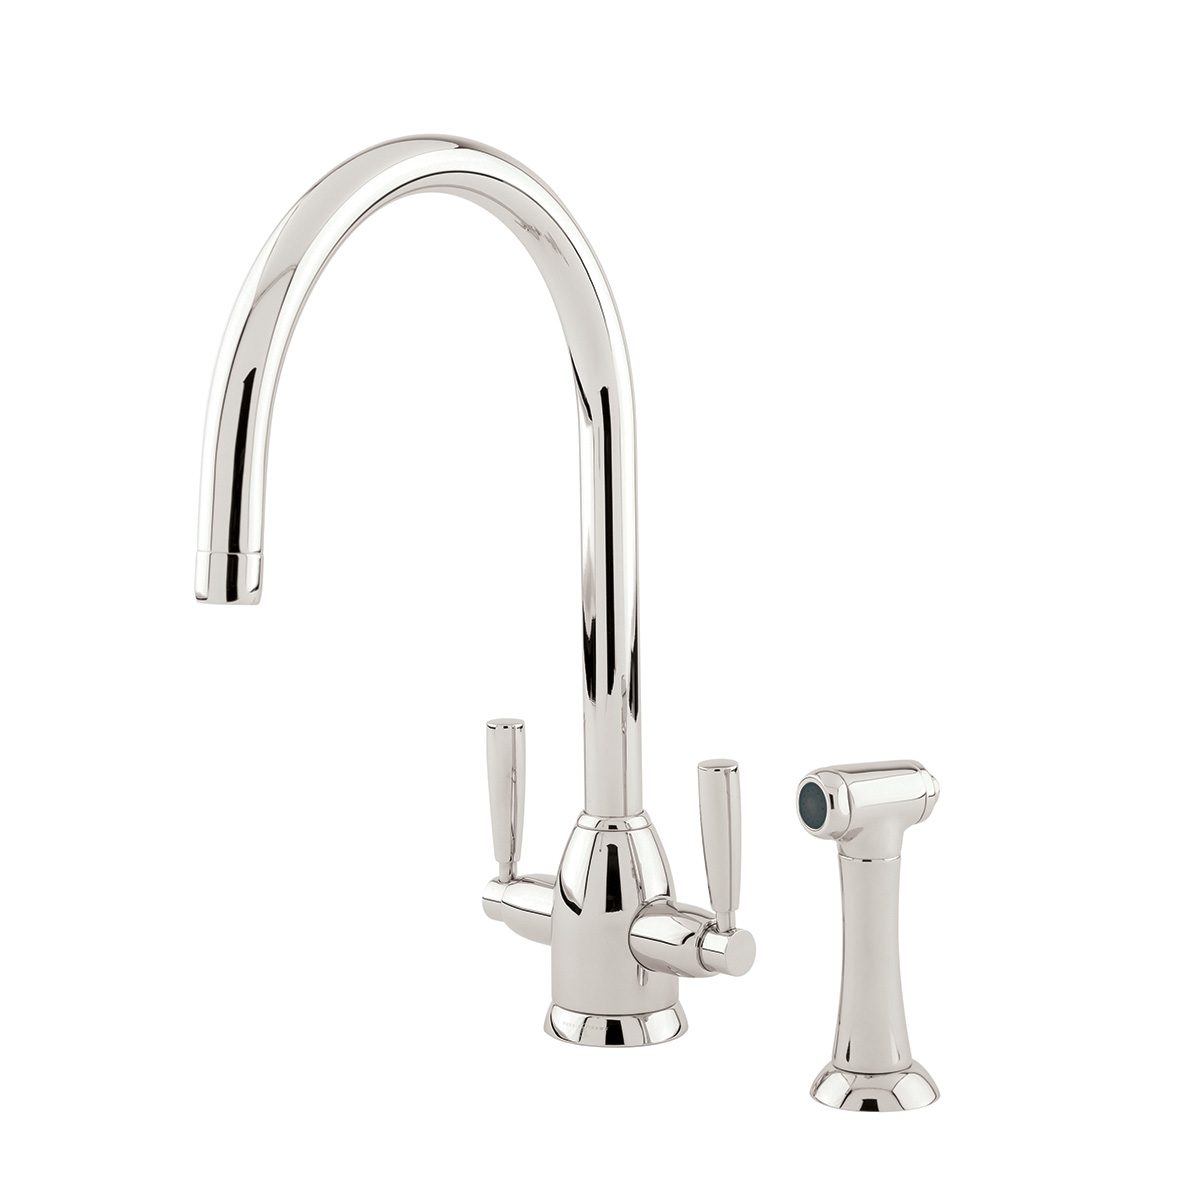 Shaws by Perrin & Rowe Silverdale kitchen mixer with spray rinse in Nickel. Oberon style kitchen mixer AUSH.4866. Distributed in Australia by Luxe by Design, Brisbane.